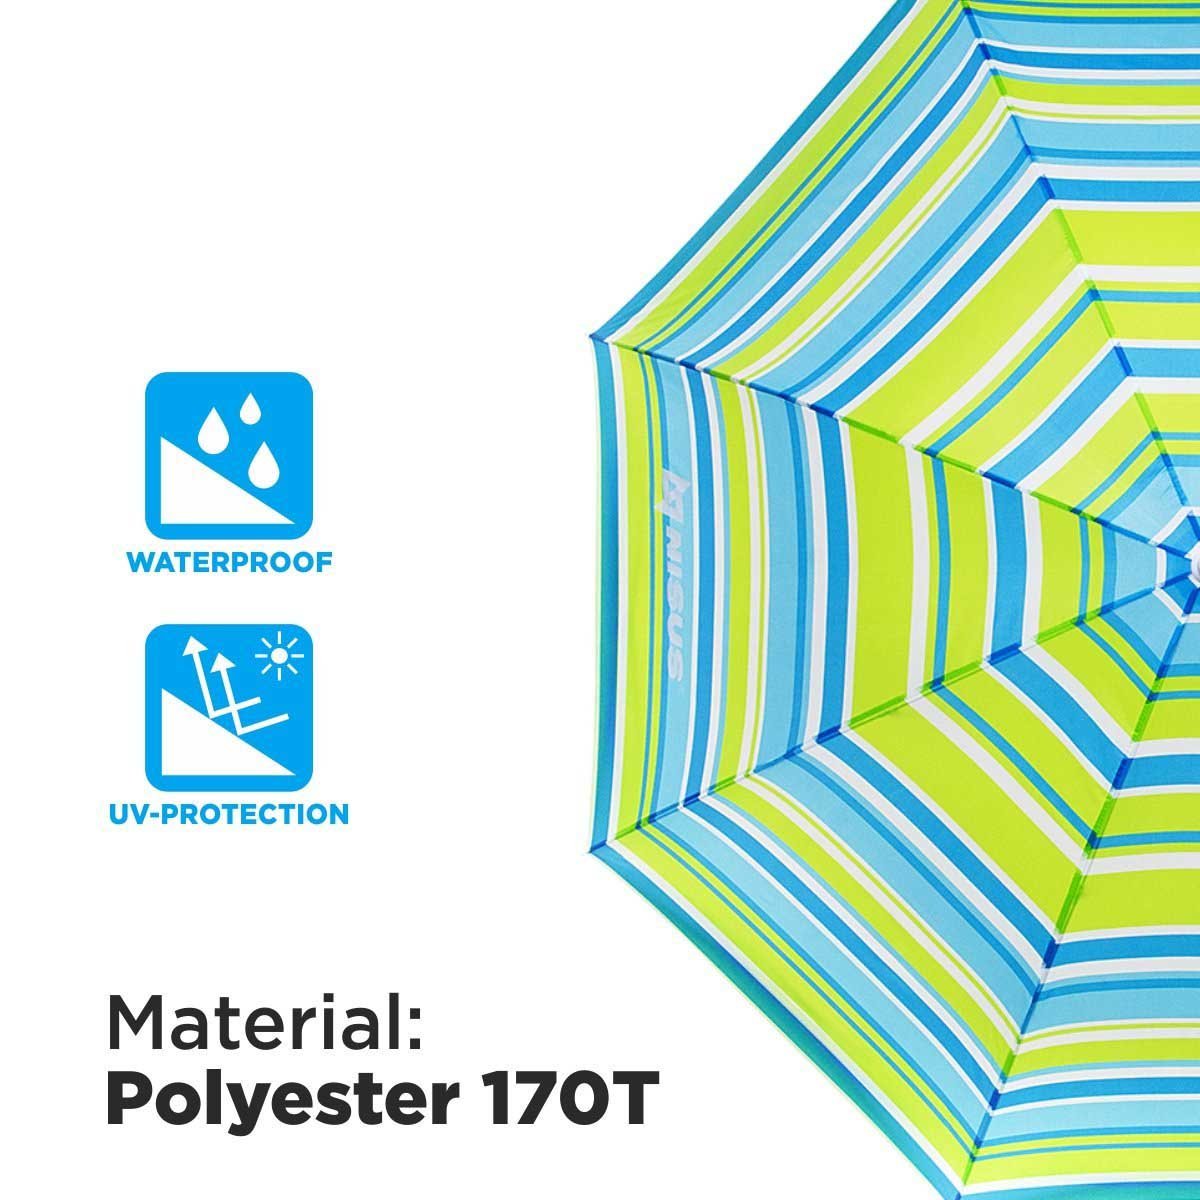 Sea-Green Tilting Beach Umbrella is made of waterproof polyester 170T featuring UV protection